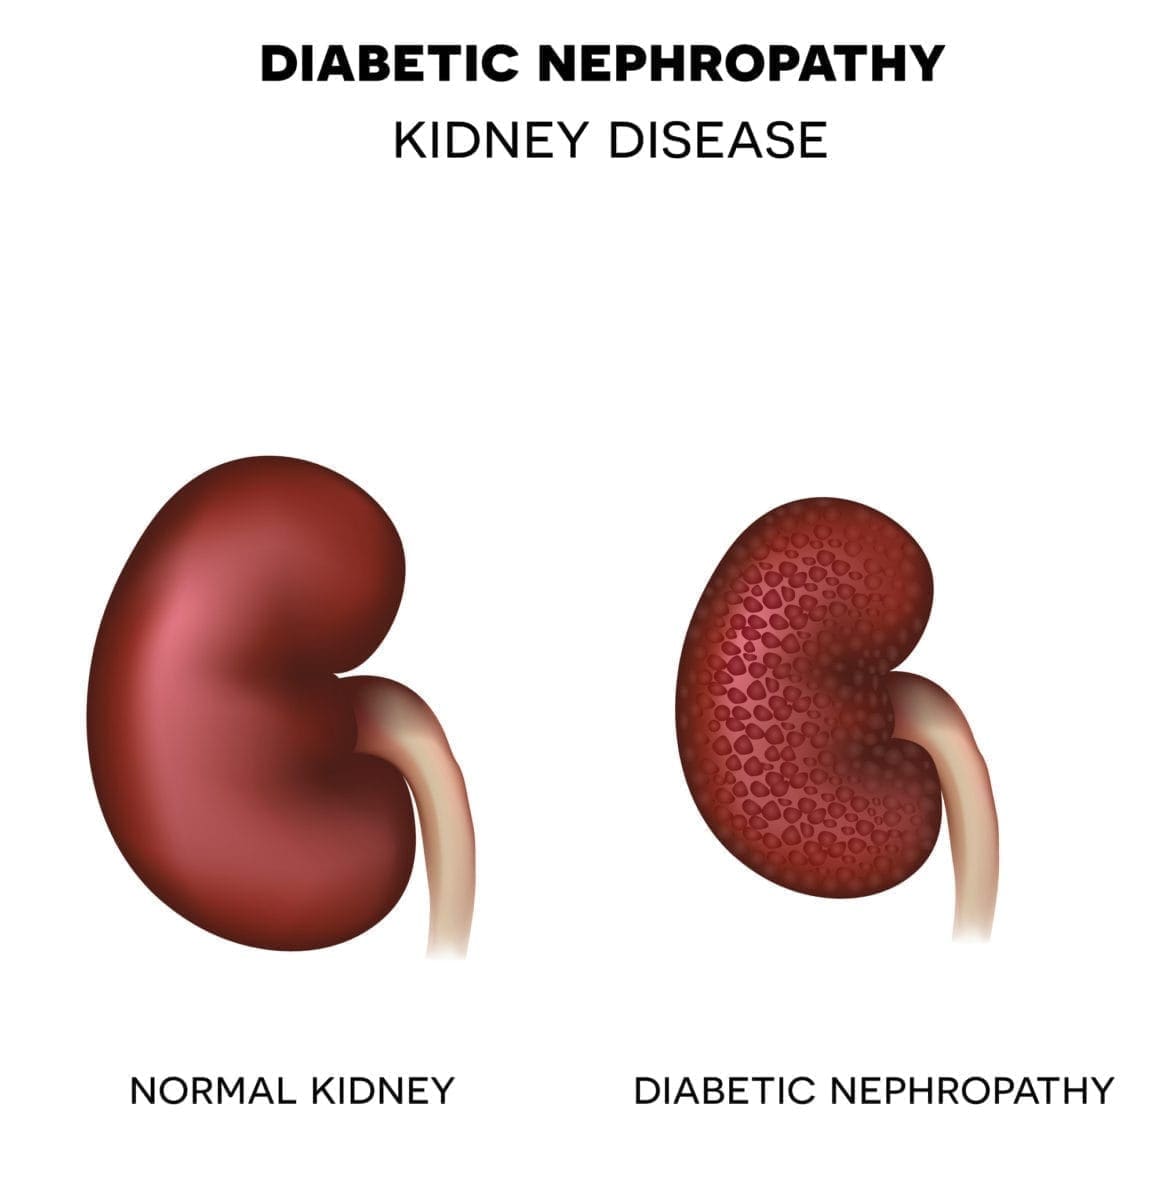 Safety, Tolerability and Efficacy of Nidufexor in Patients With Diabetic Nephropathy